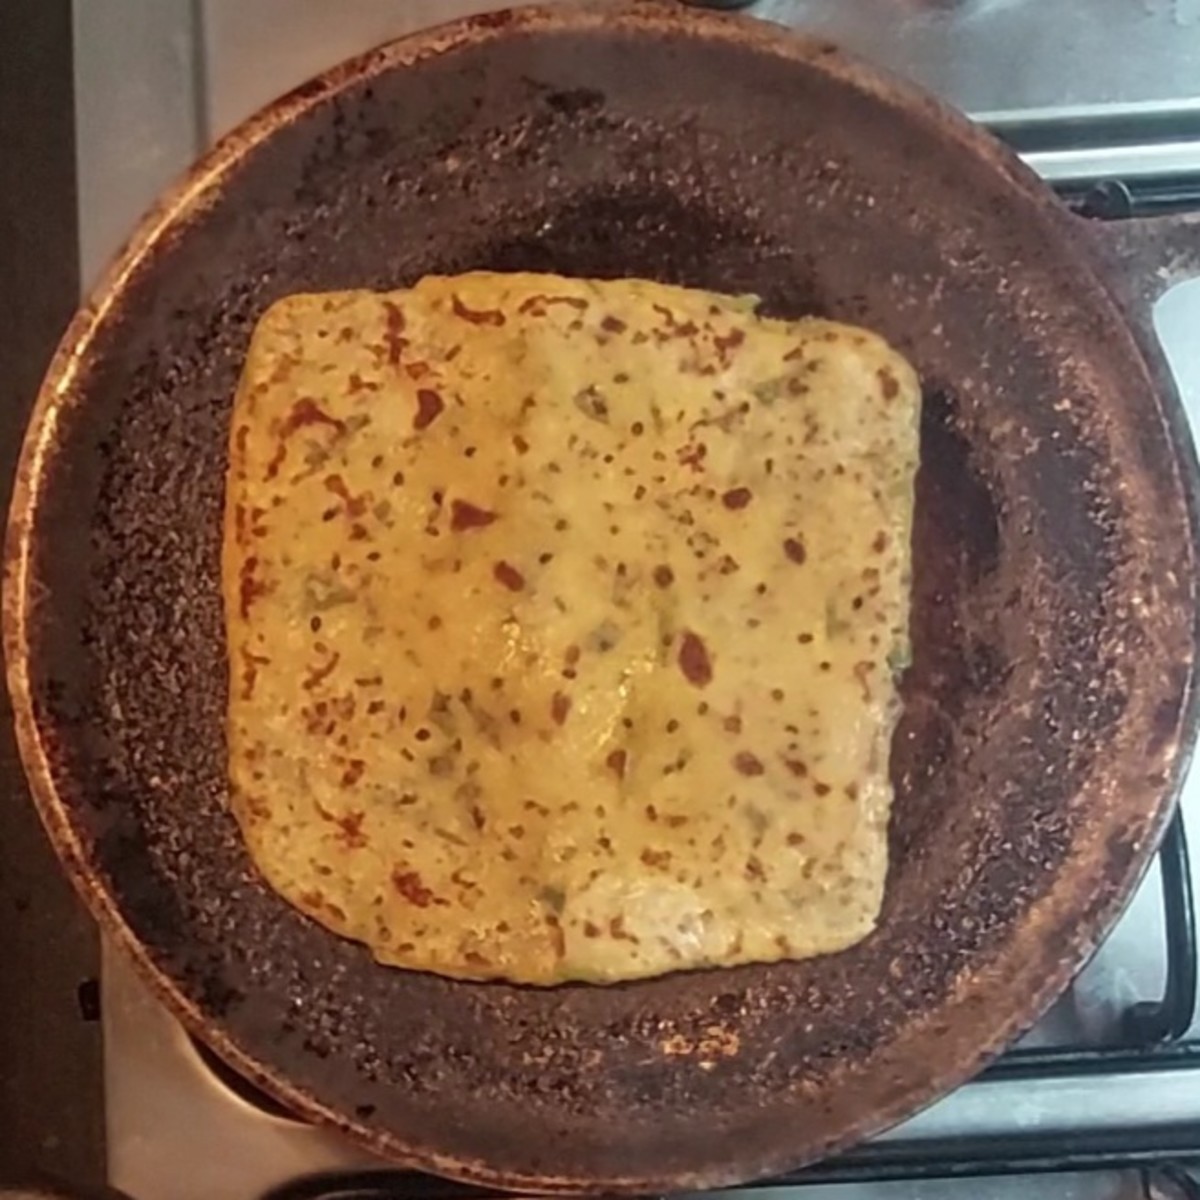 Flip and cook both sides till brown spots appear. Transfer to a plate.